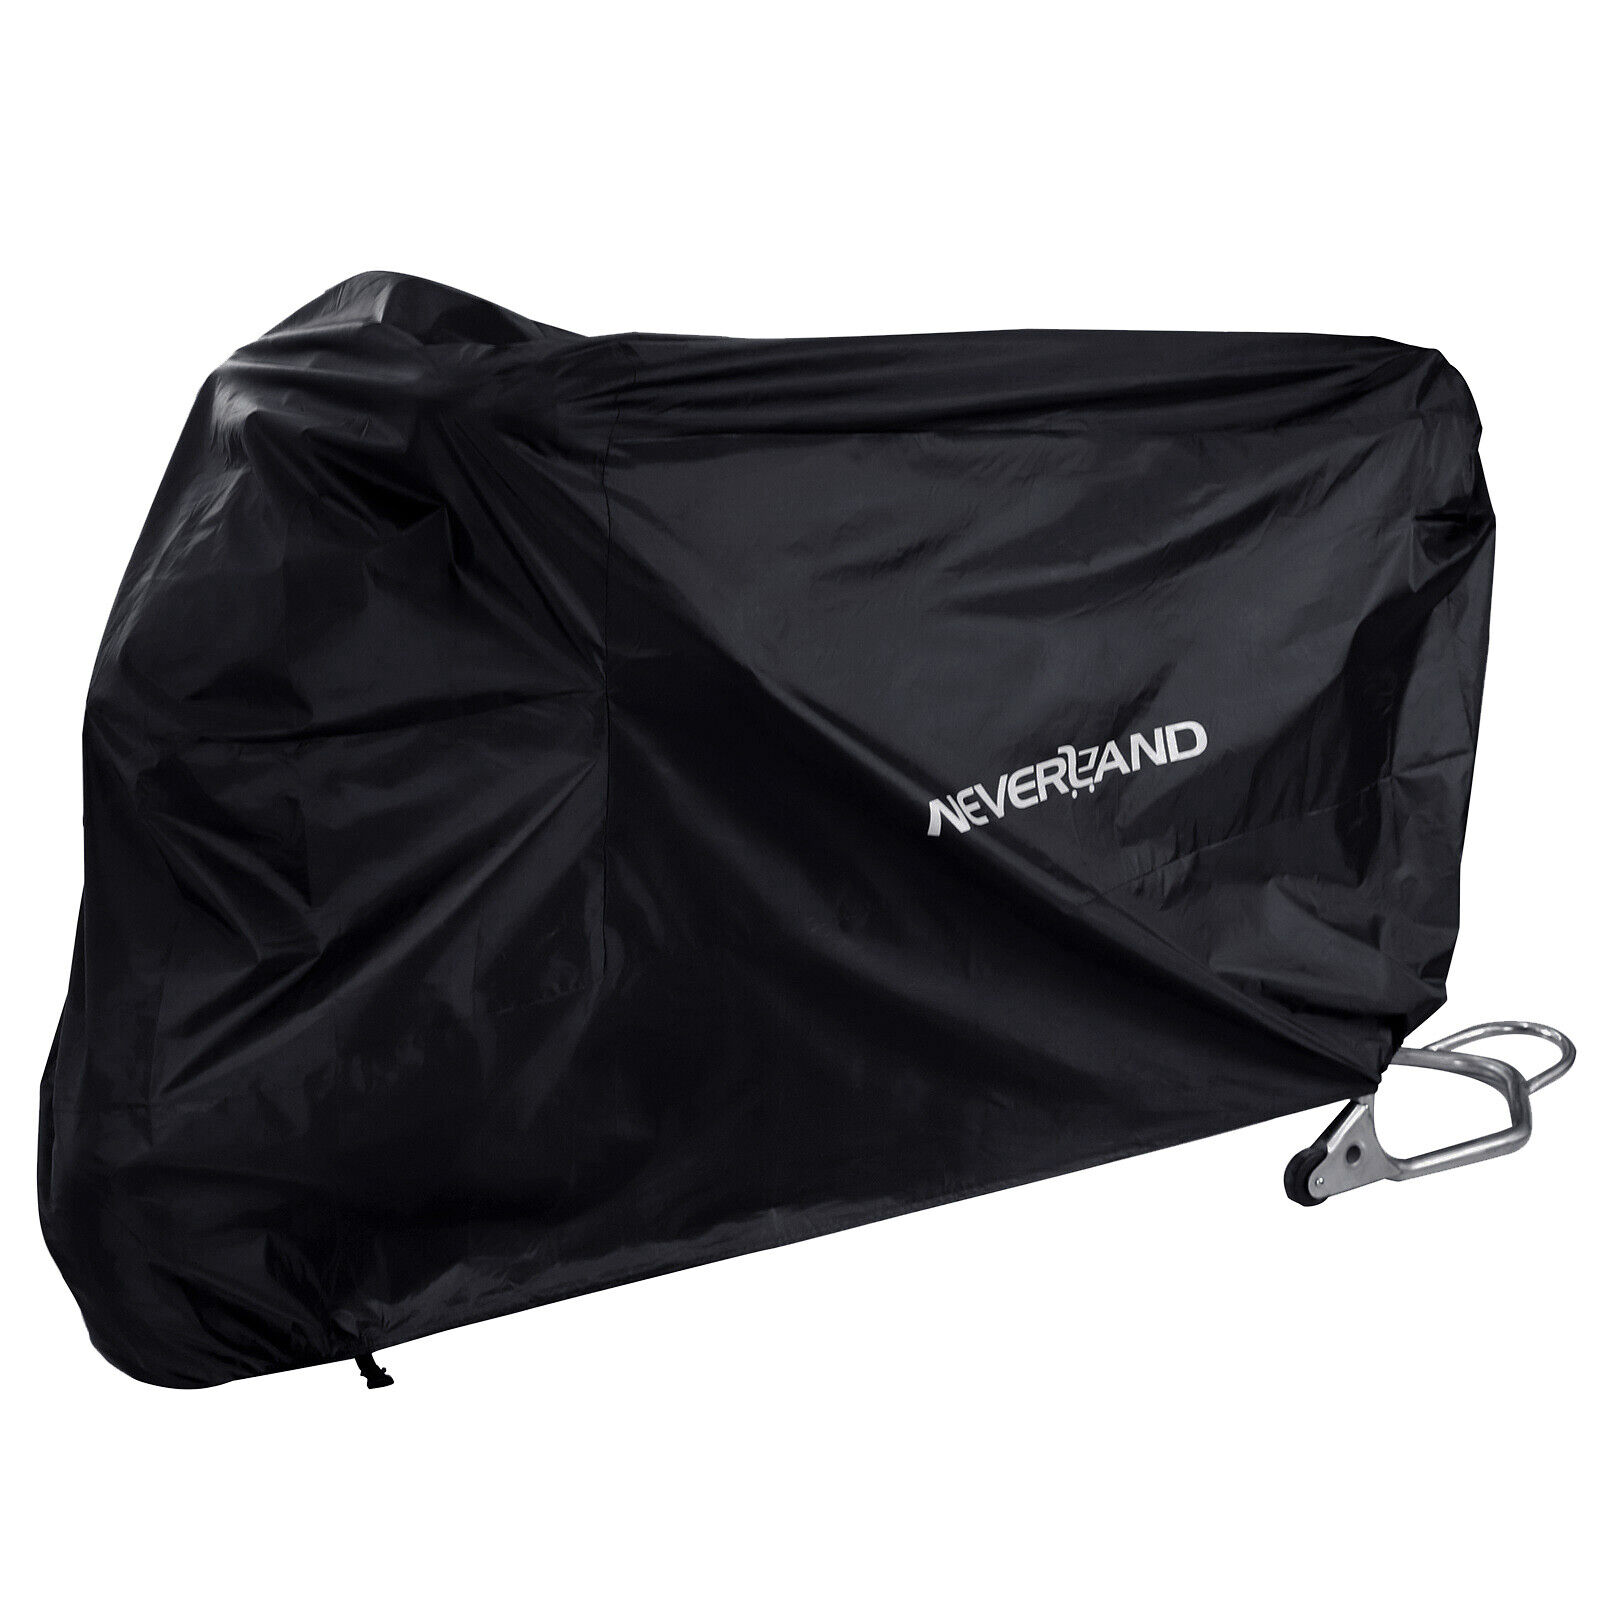 NEVERLAND Large Motorcycle Bike Cover Waterproof Scooter Outdoor Dust Protector